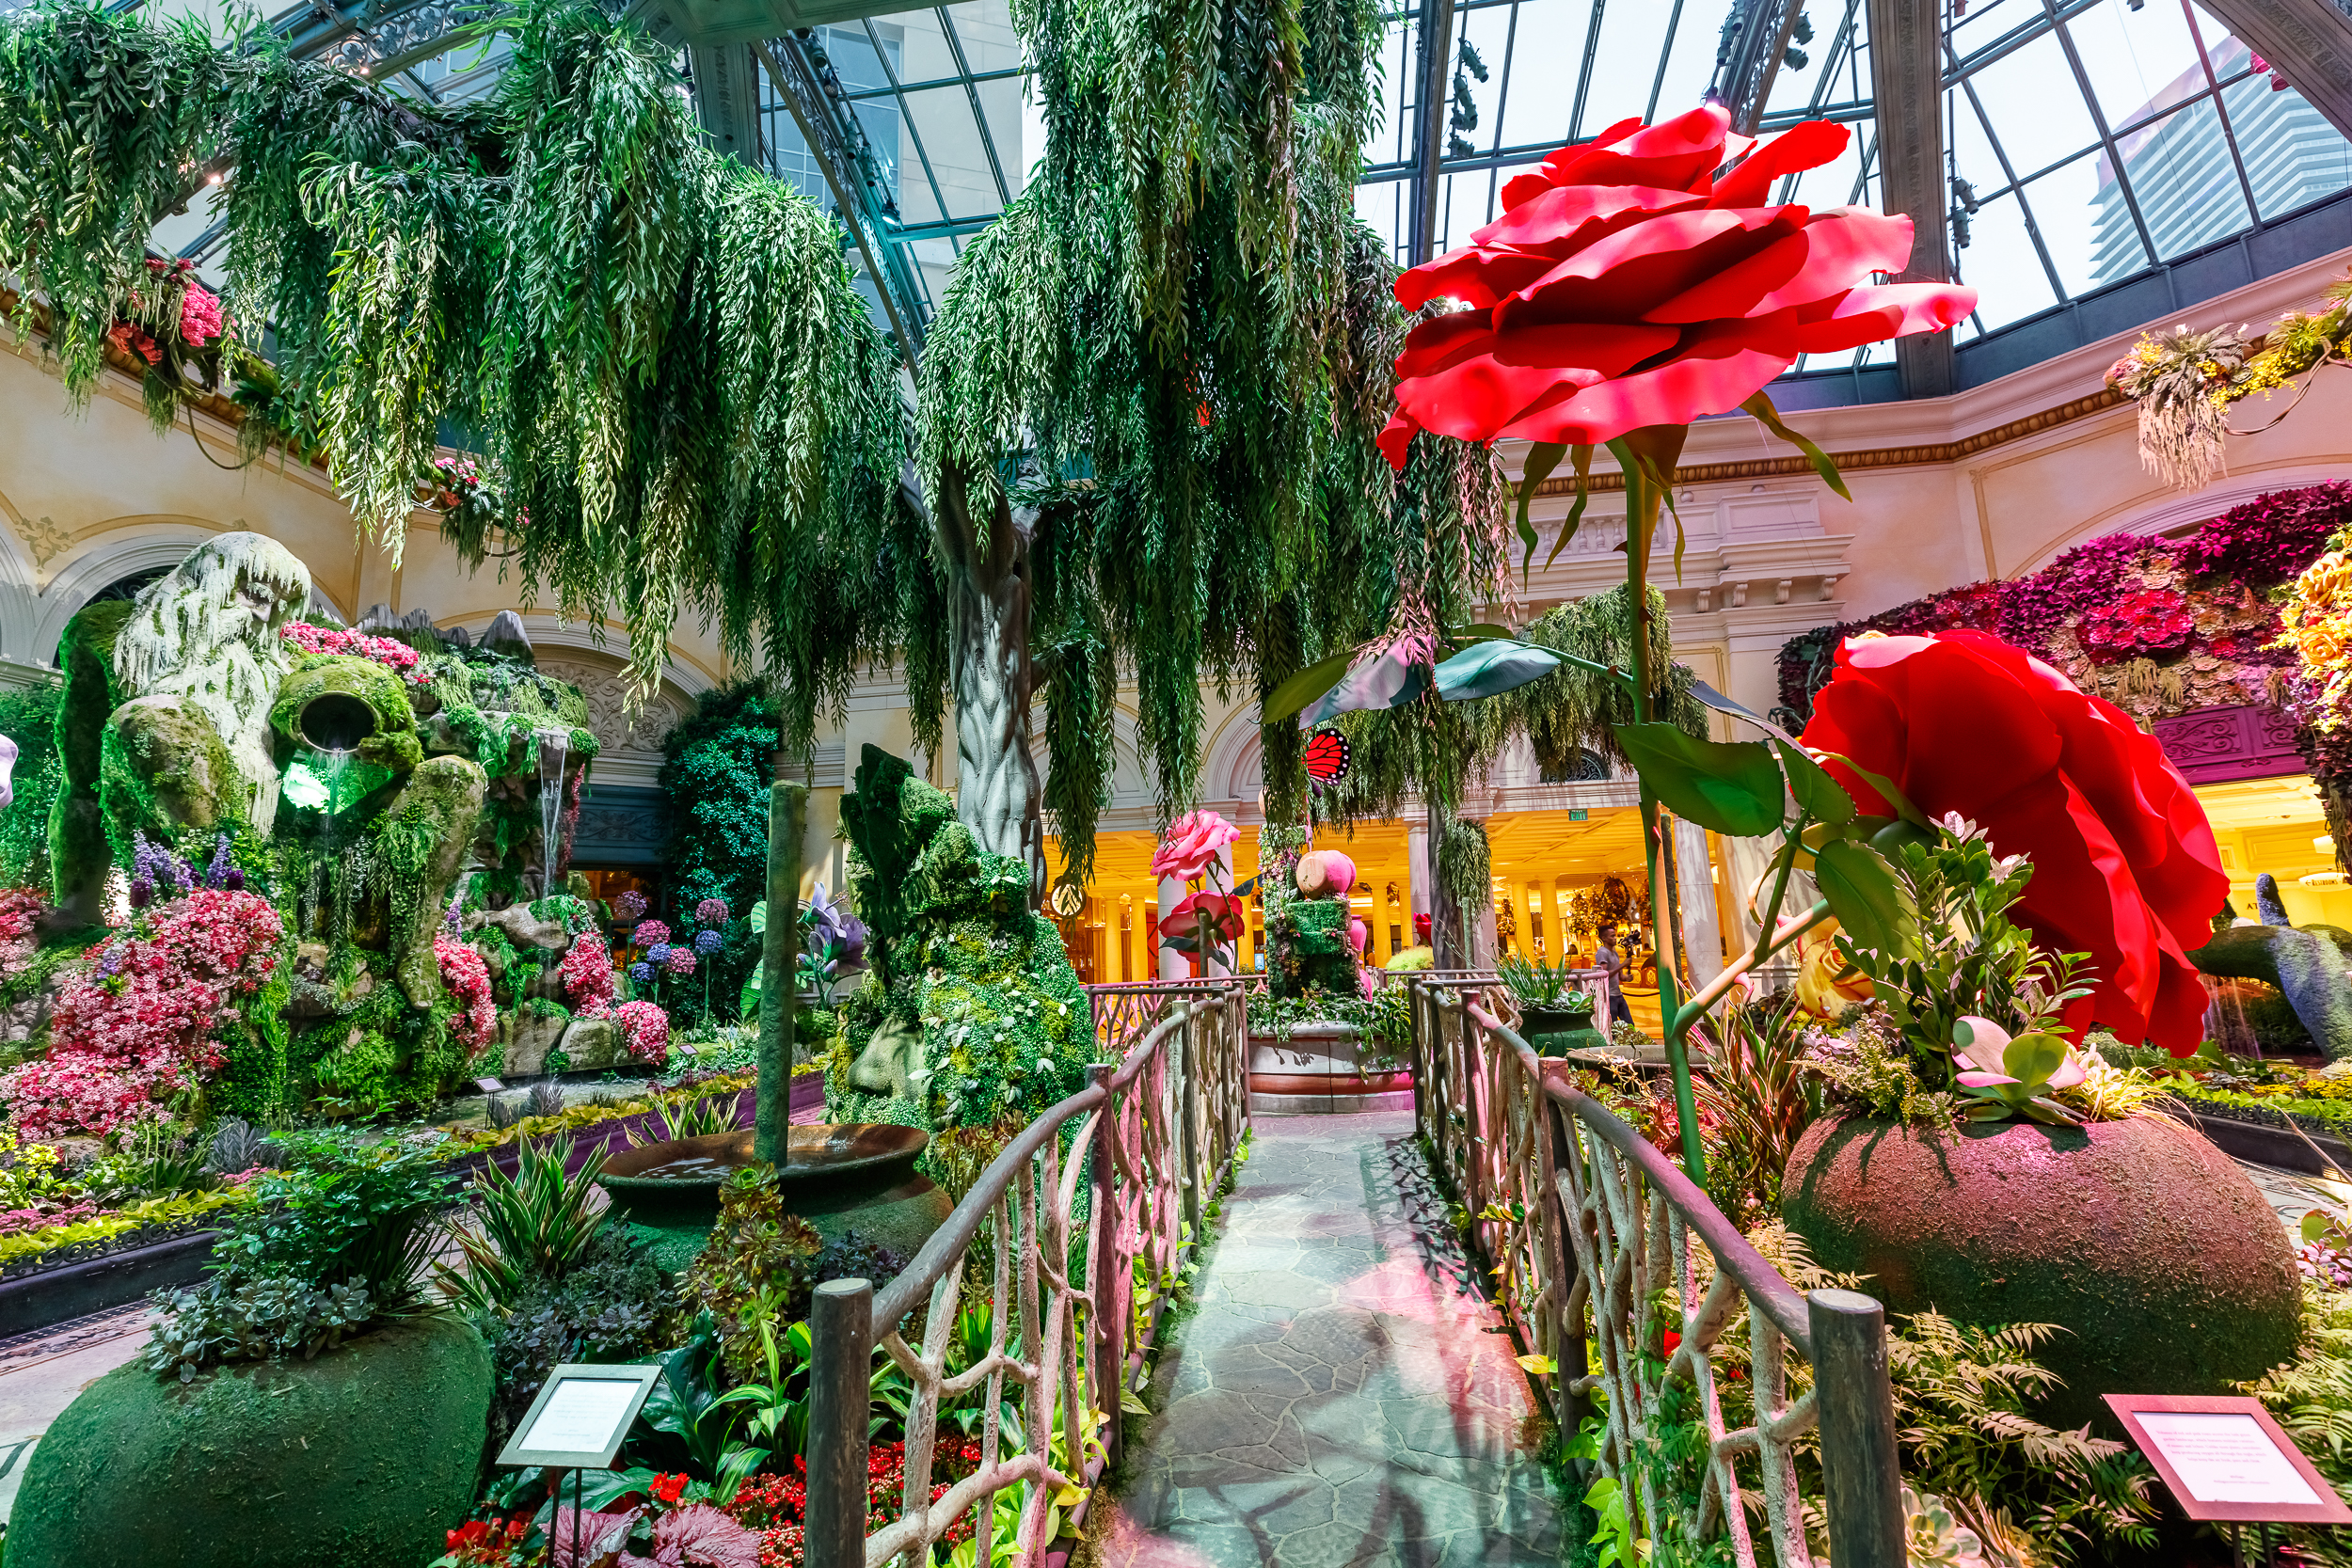 See Bellagio's New Display and Resorts World Overflows with Applications